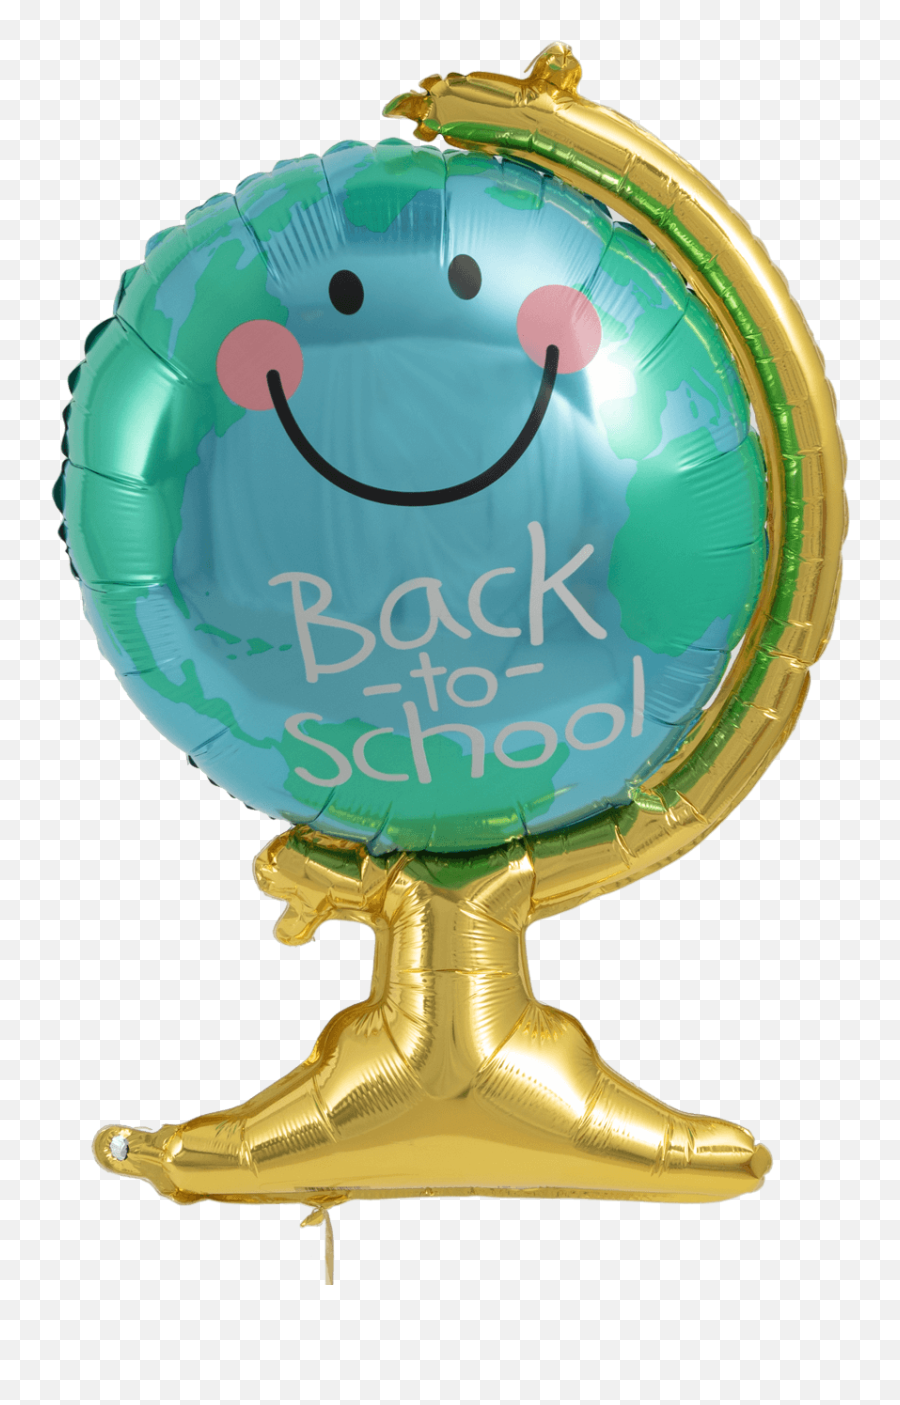 Back To School Helium Filled Balloon - Back To School Helium Balloon Emoji,Balloon Emoticon